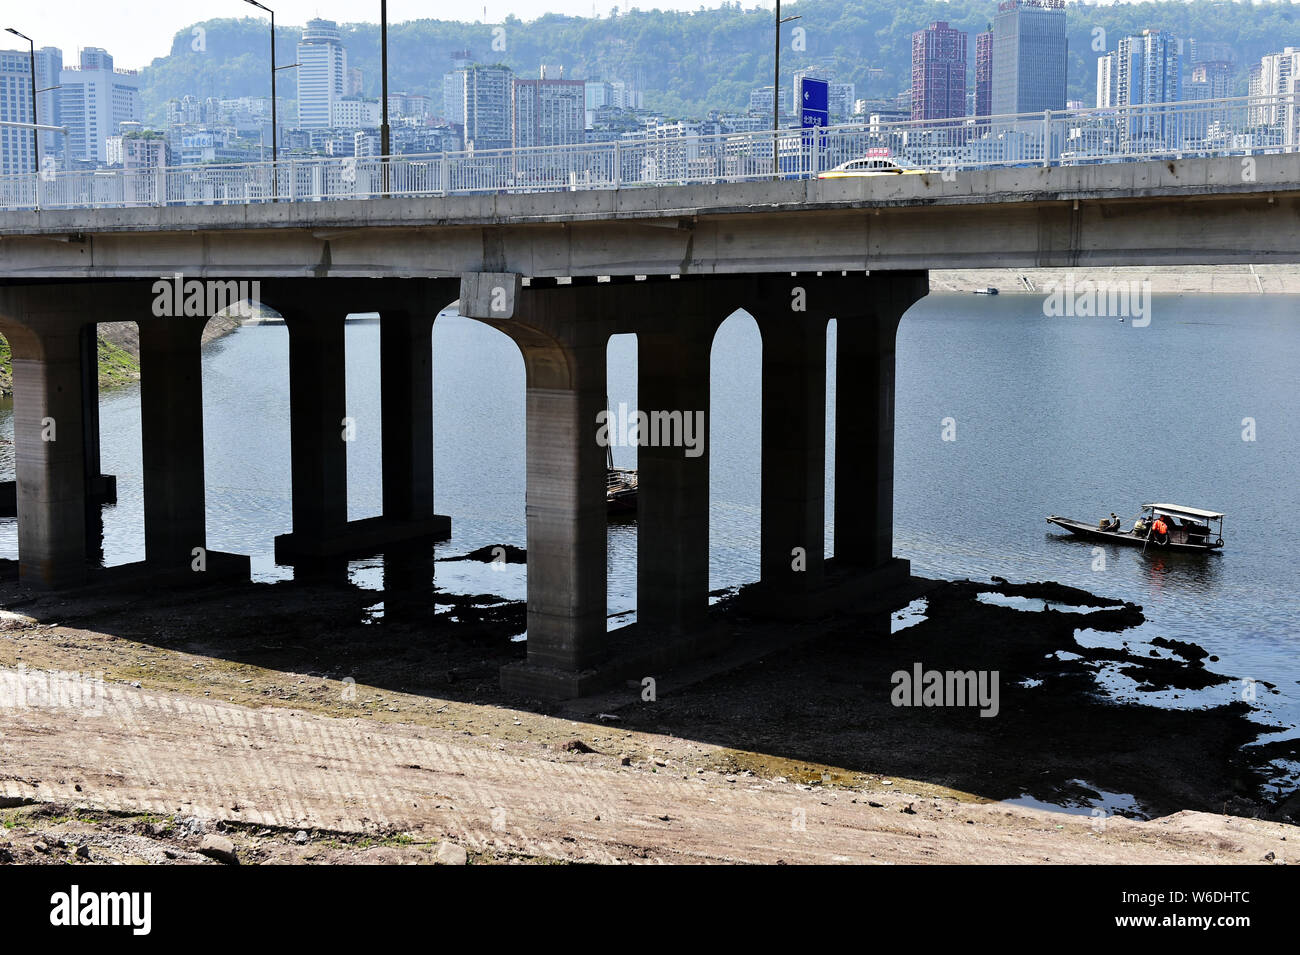 Boats are seen under a 5.6-kilometer 'overwater highway', linking downtown Wanzhou and the Wanzhou North Railway Station at the Three Gorges Reservoir Stock Photo